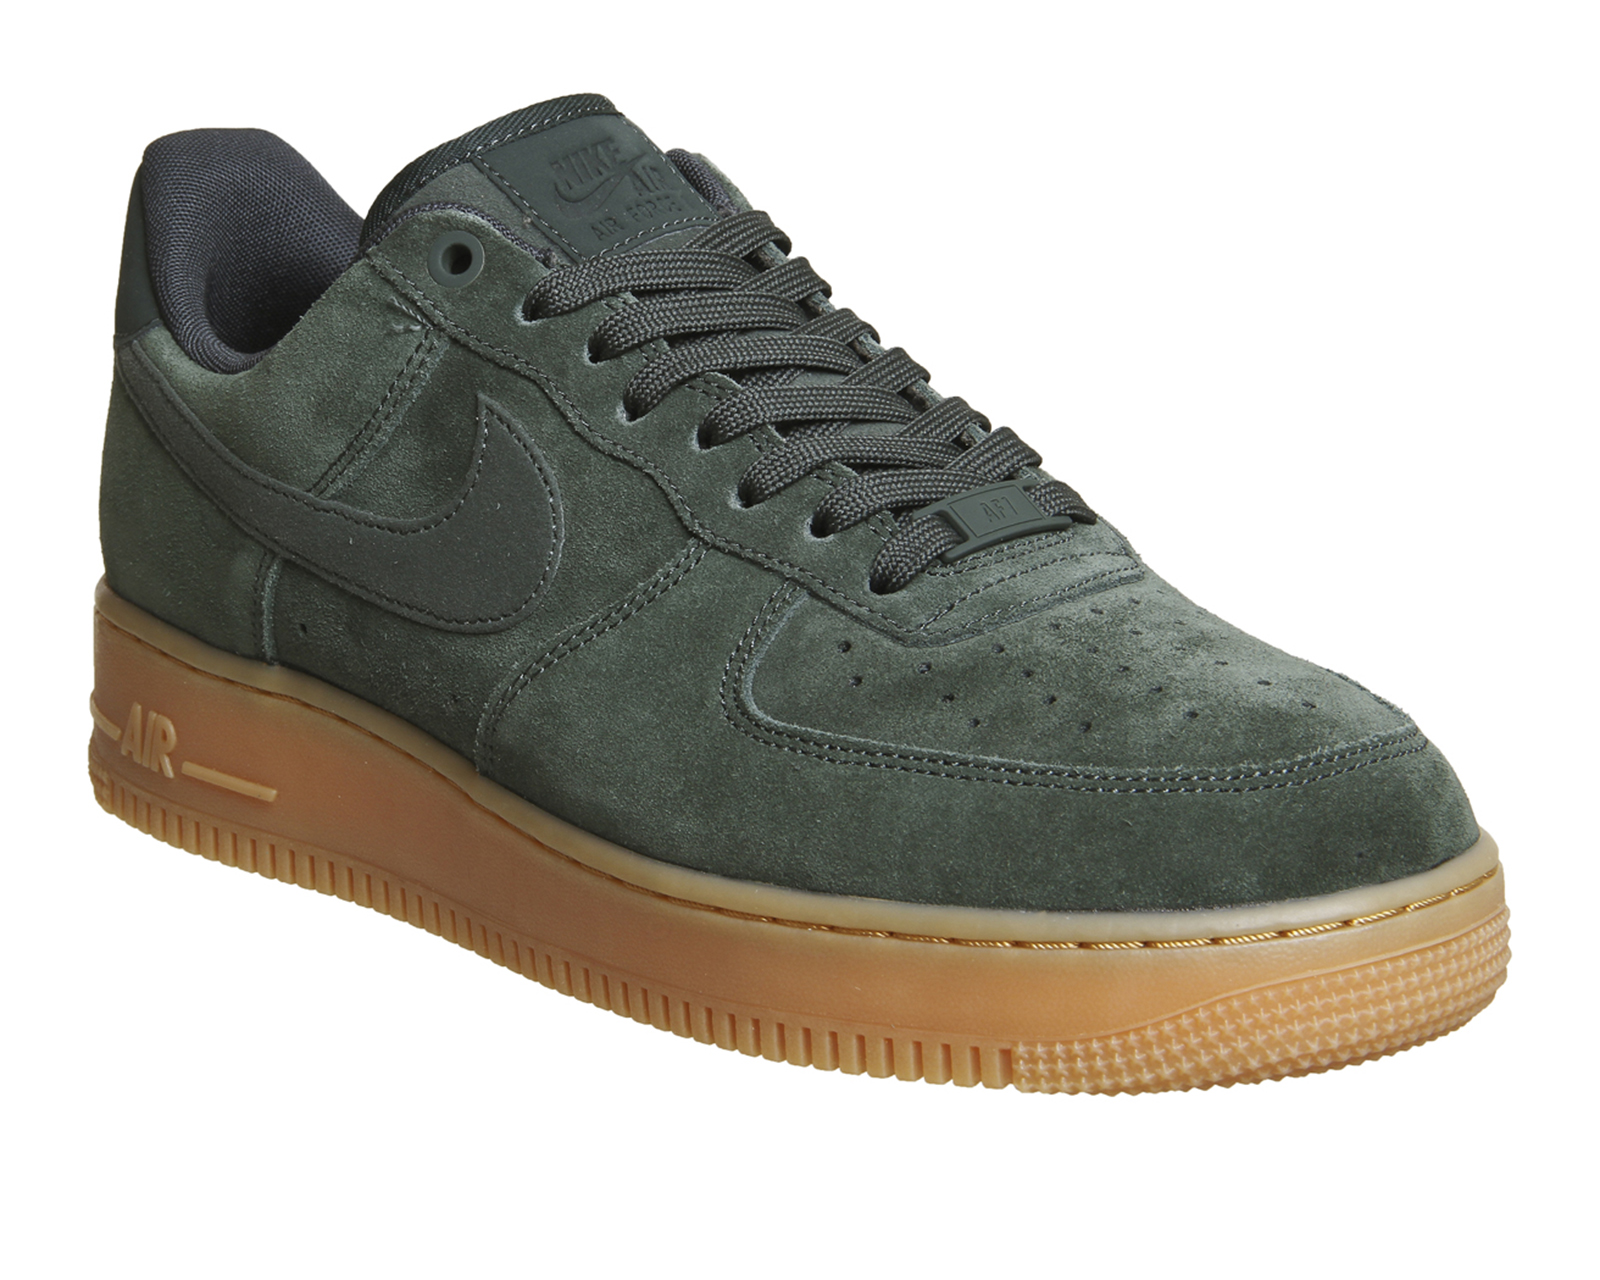 green suede air force 1